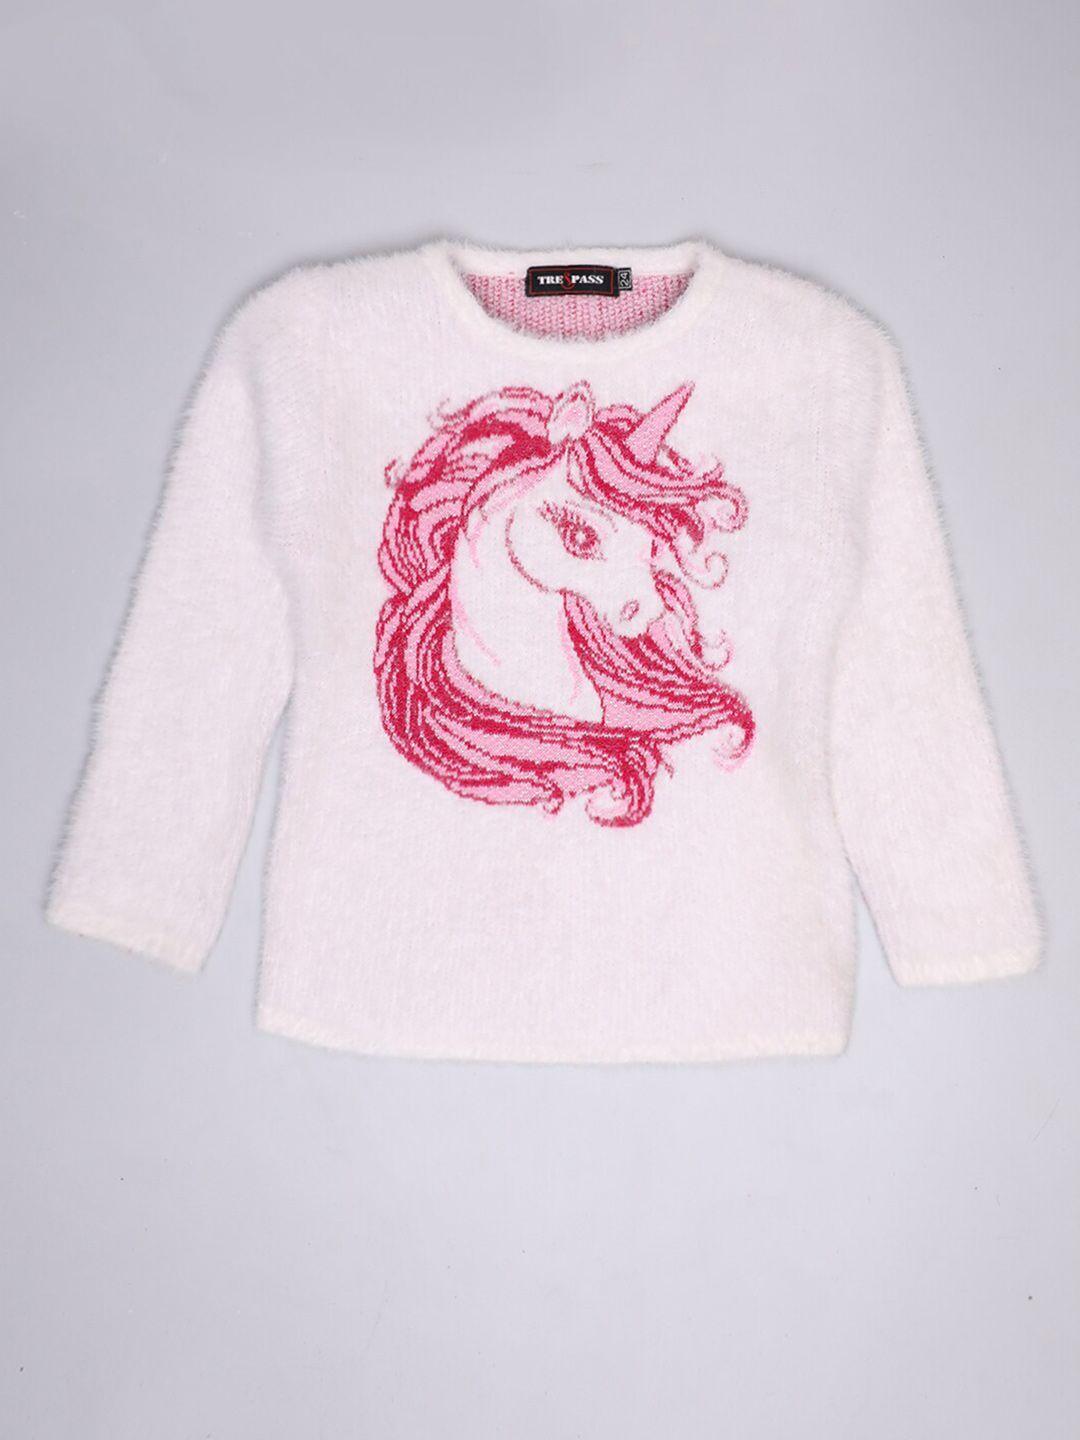 tre&pass boys white & pink printed woolen pullover